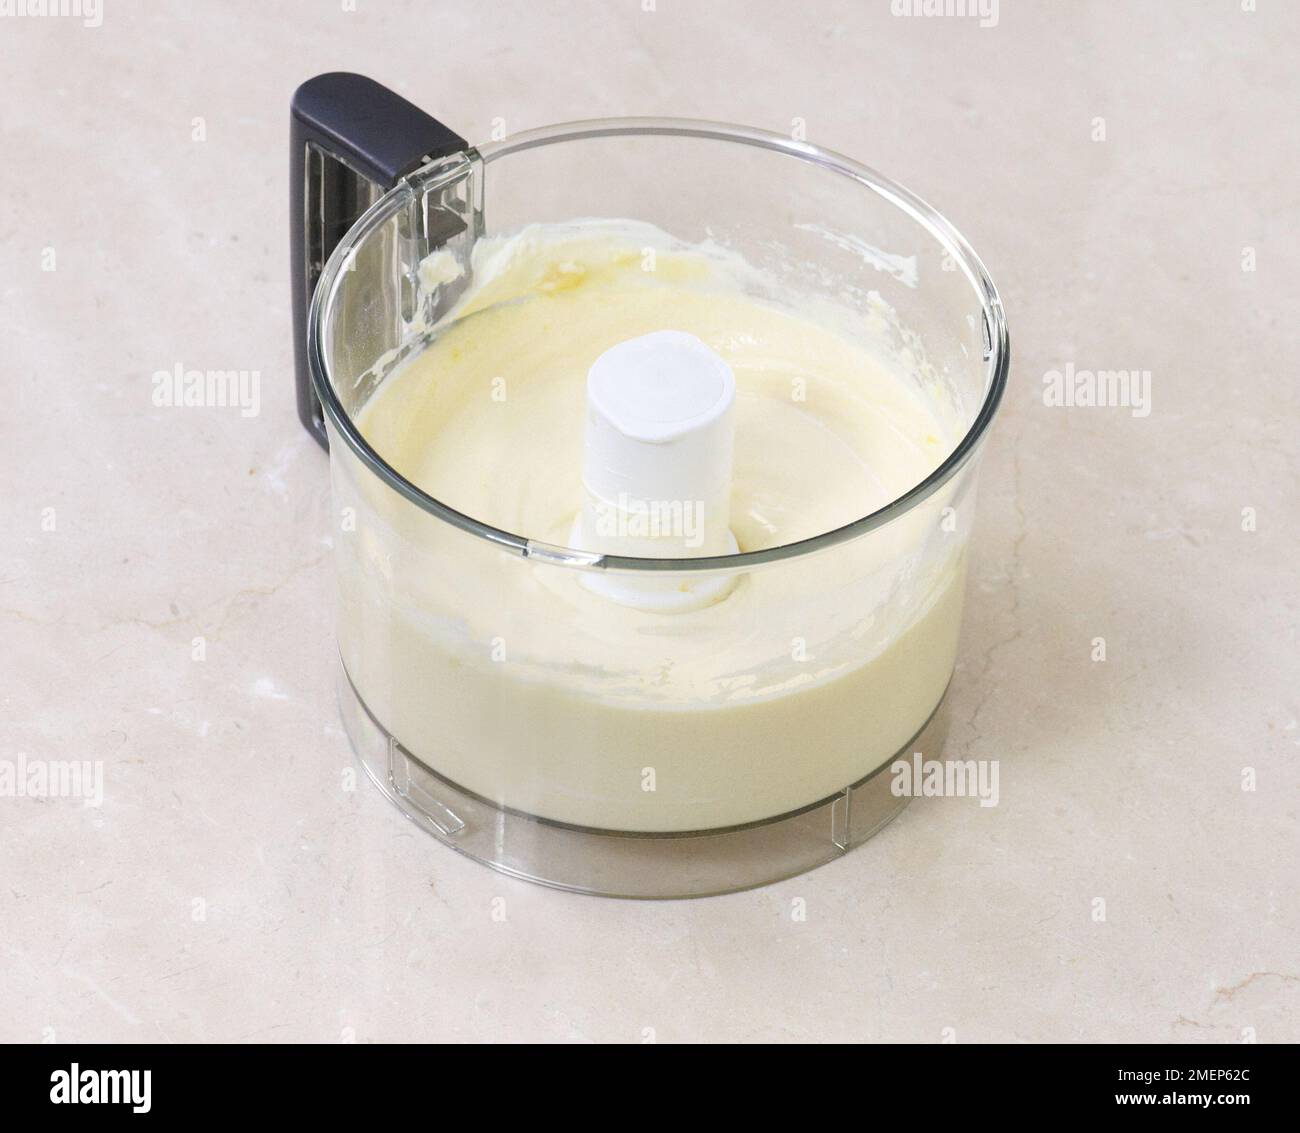 Cheesecake mixture in food processor Stock Photo